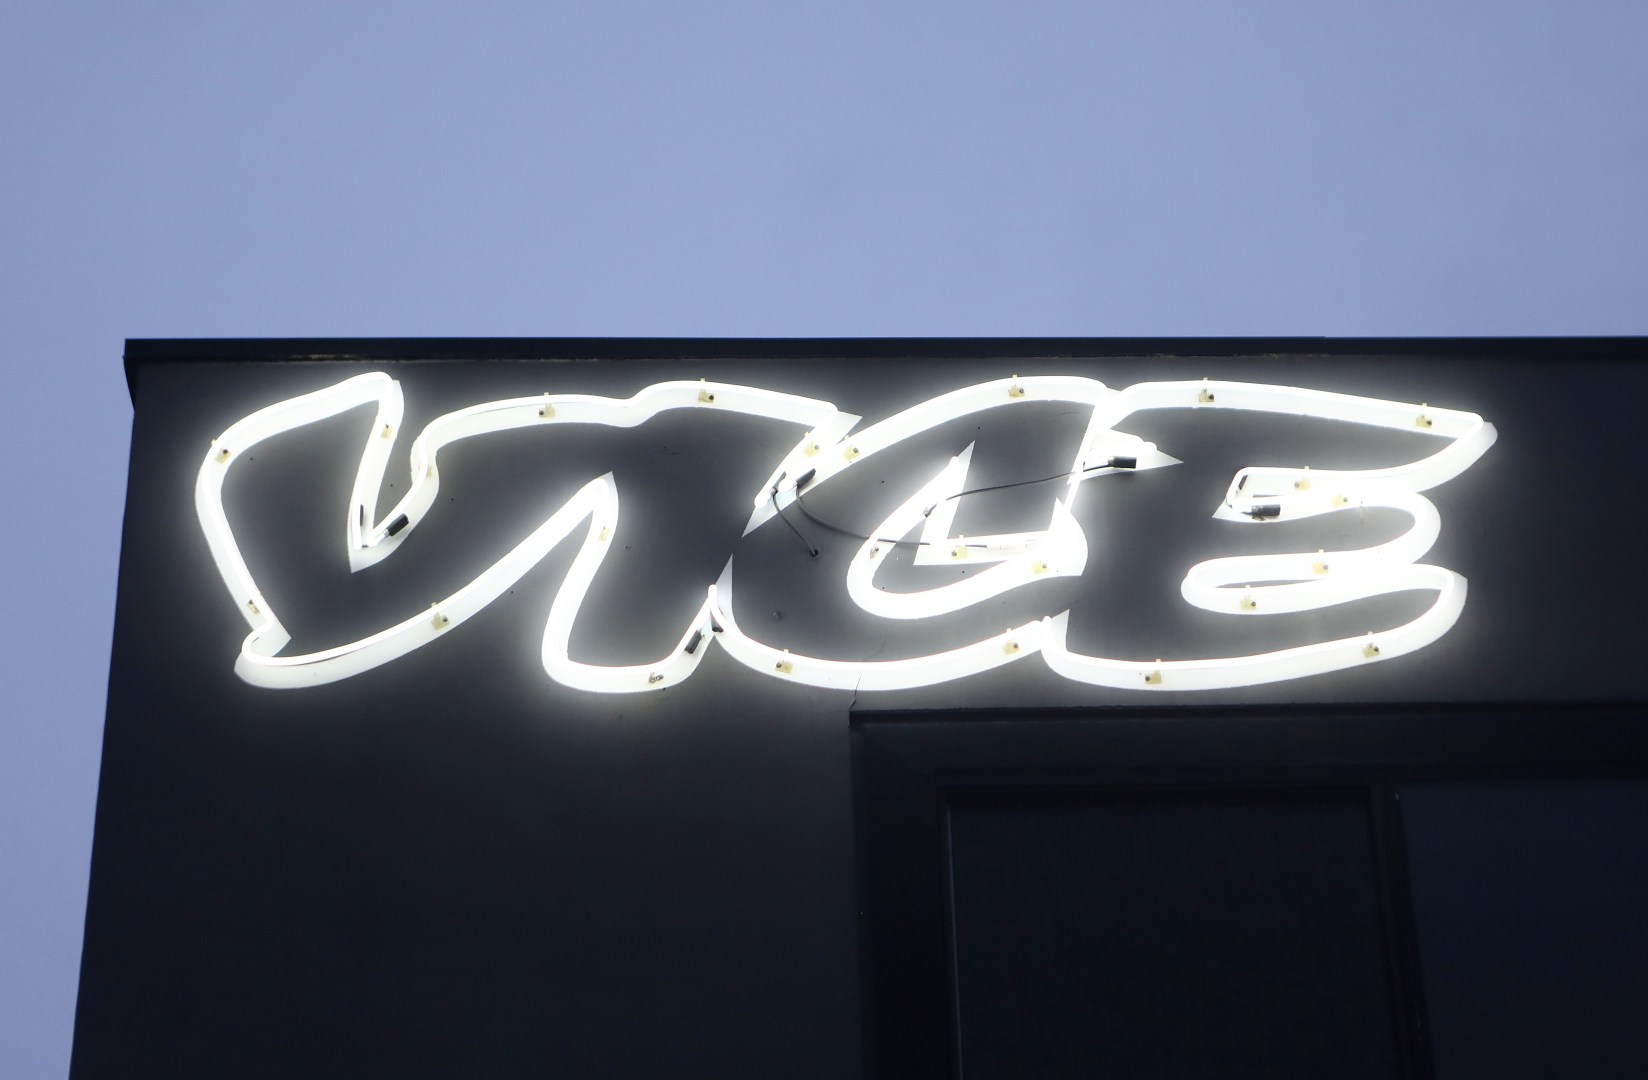 Vice Media, once valued at .7 billion, has filed for Chapter 11 bankruptcy as media outlets face setbacks.